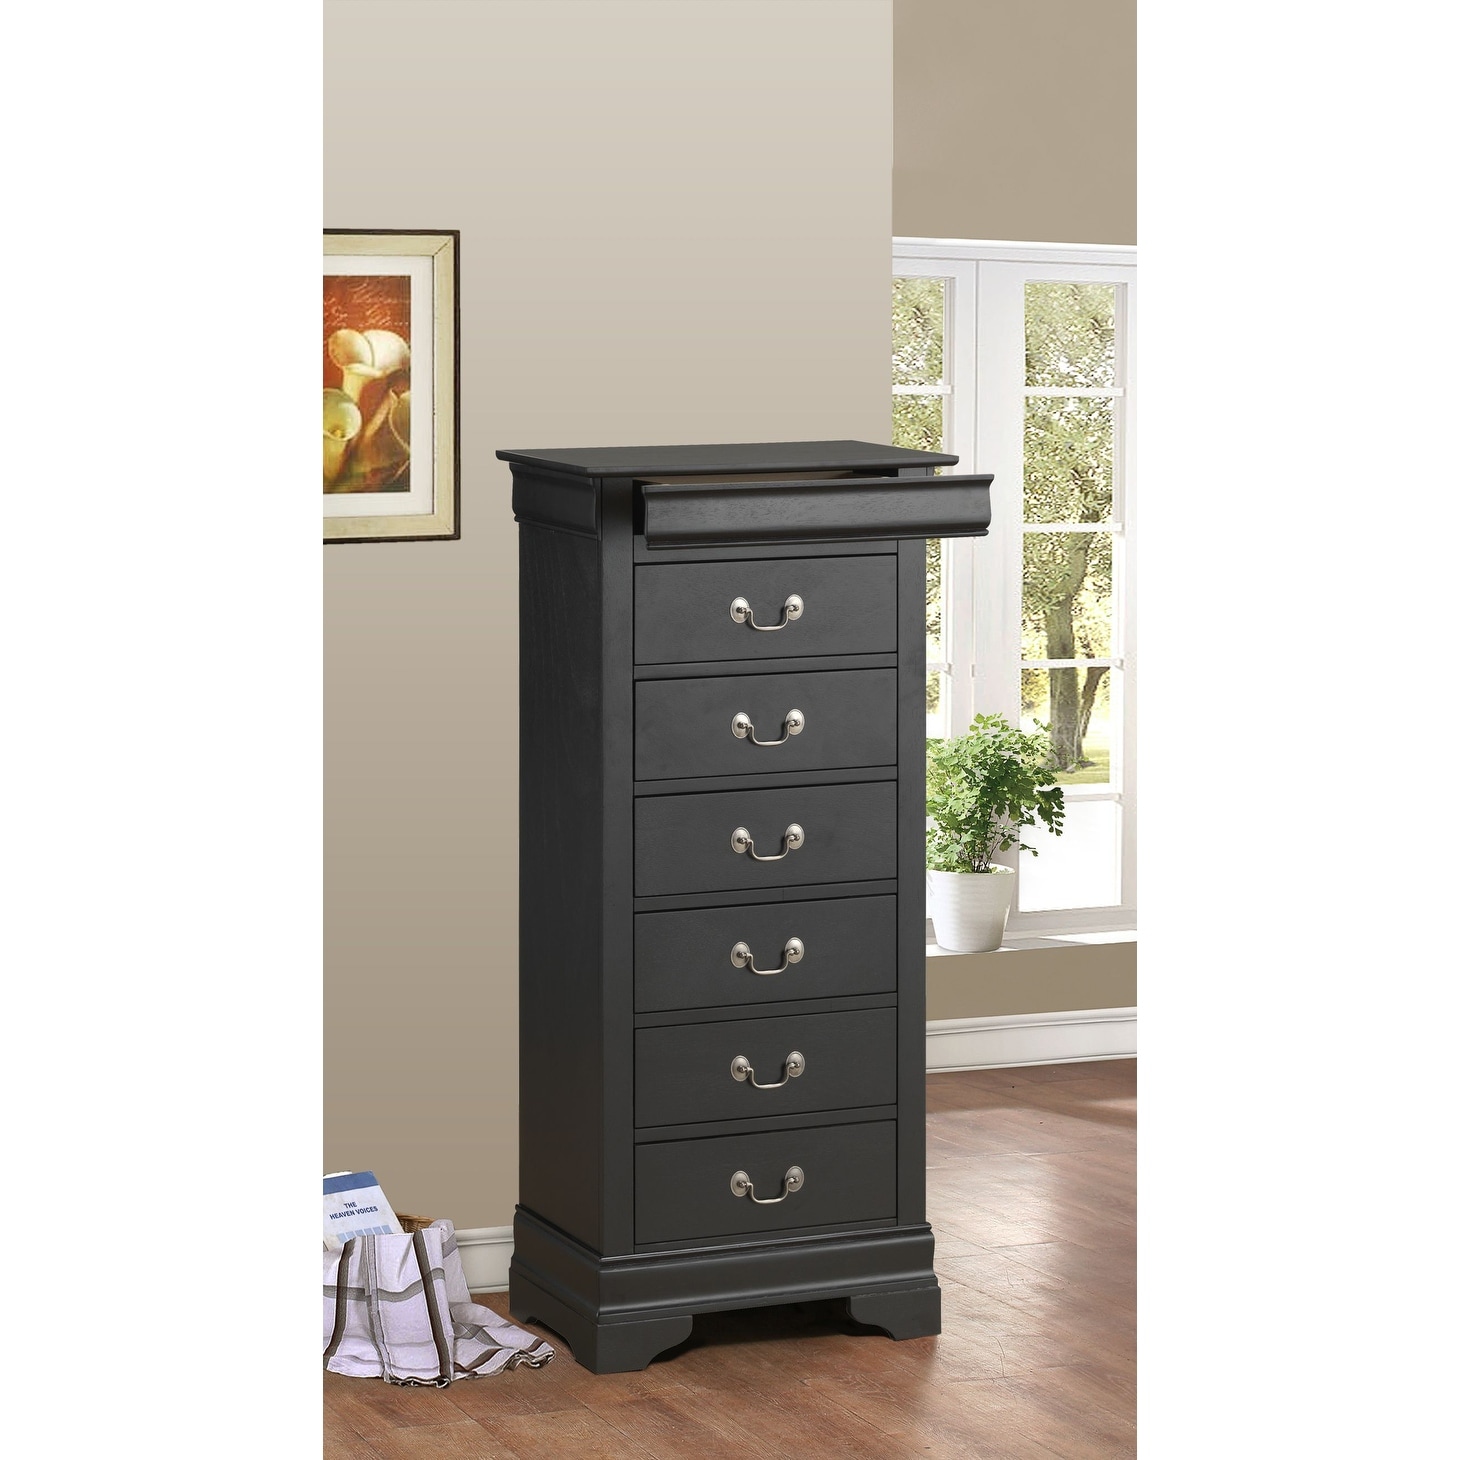 Louis Philippe Louis Philippe Style 6 Drawer Dresser with Hidden Jewel